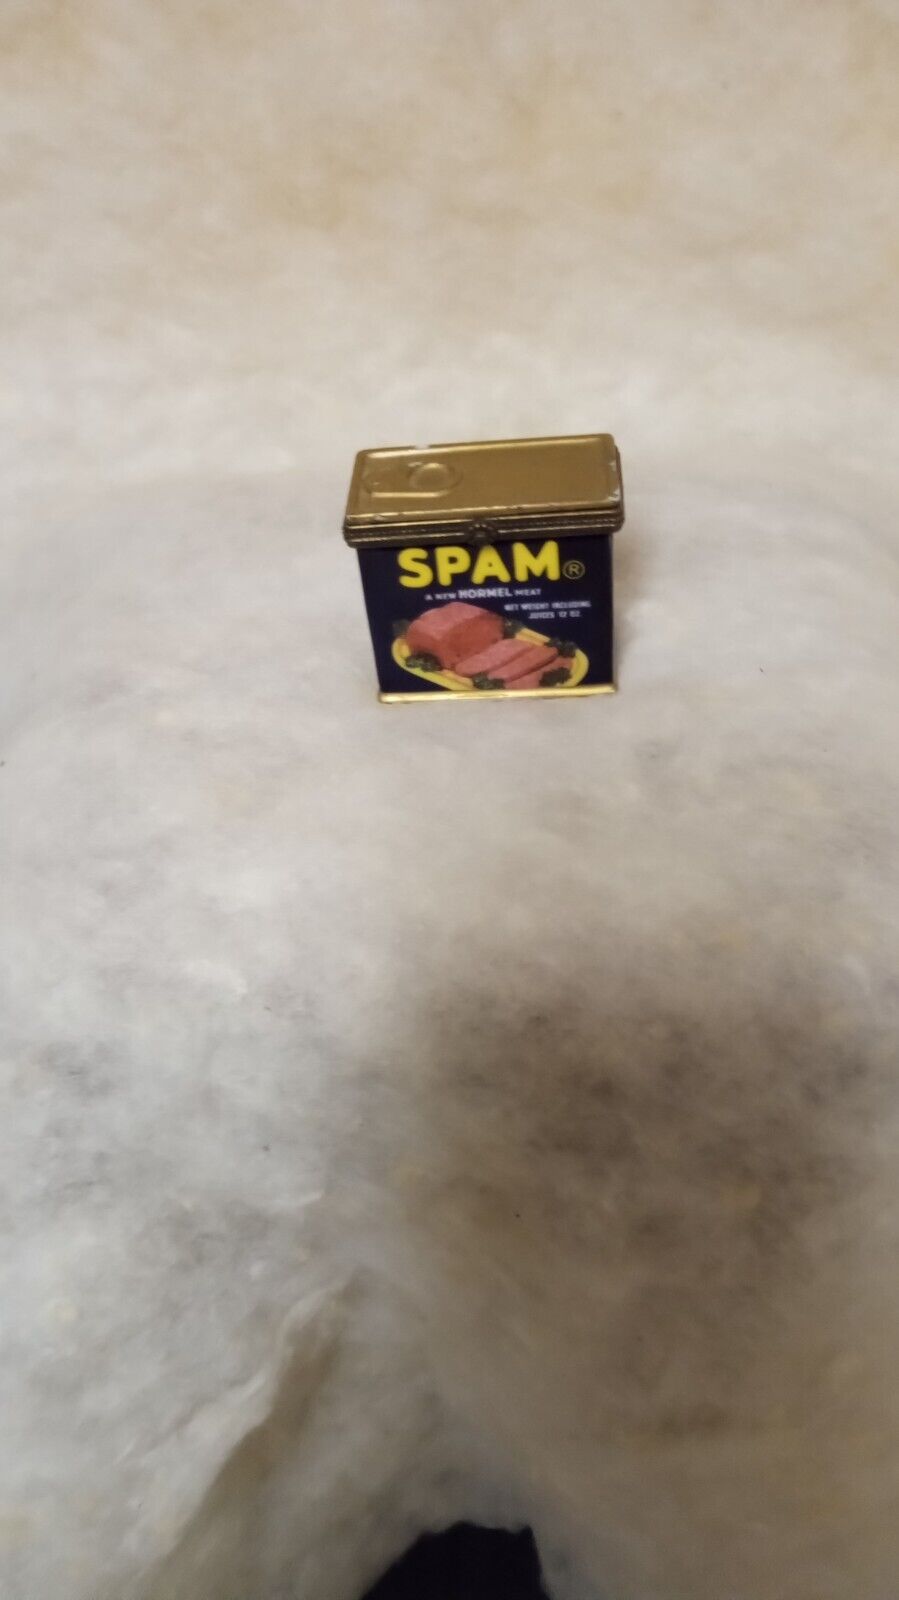 SPAM  Porcelain Hinged Trinket Box Midwest of Cannon Falls,Hormel Foods Corp